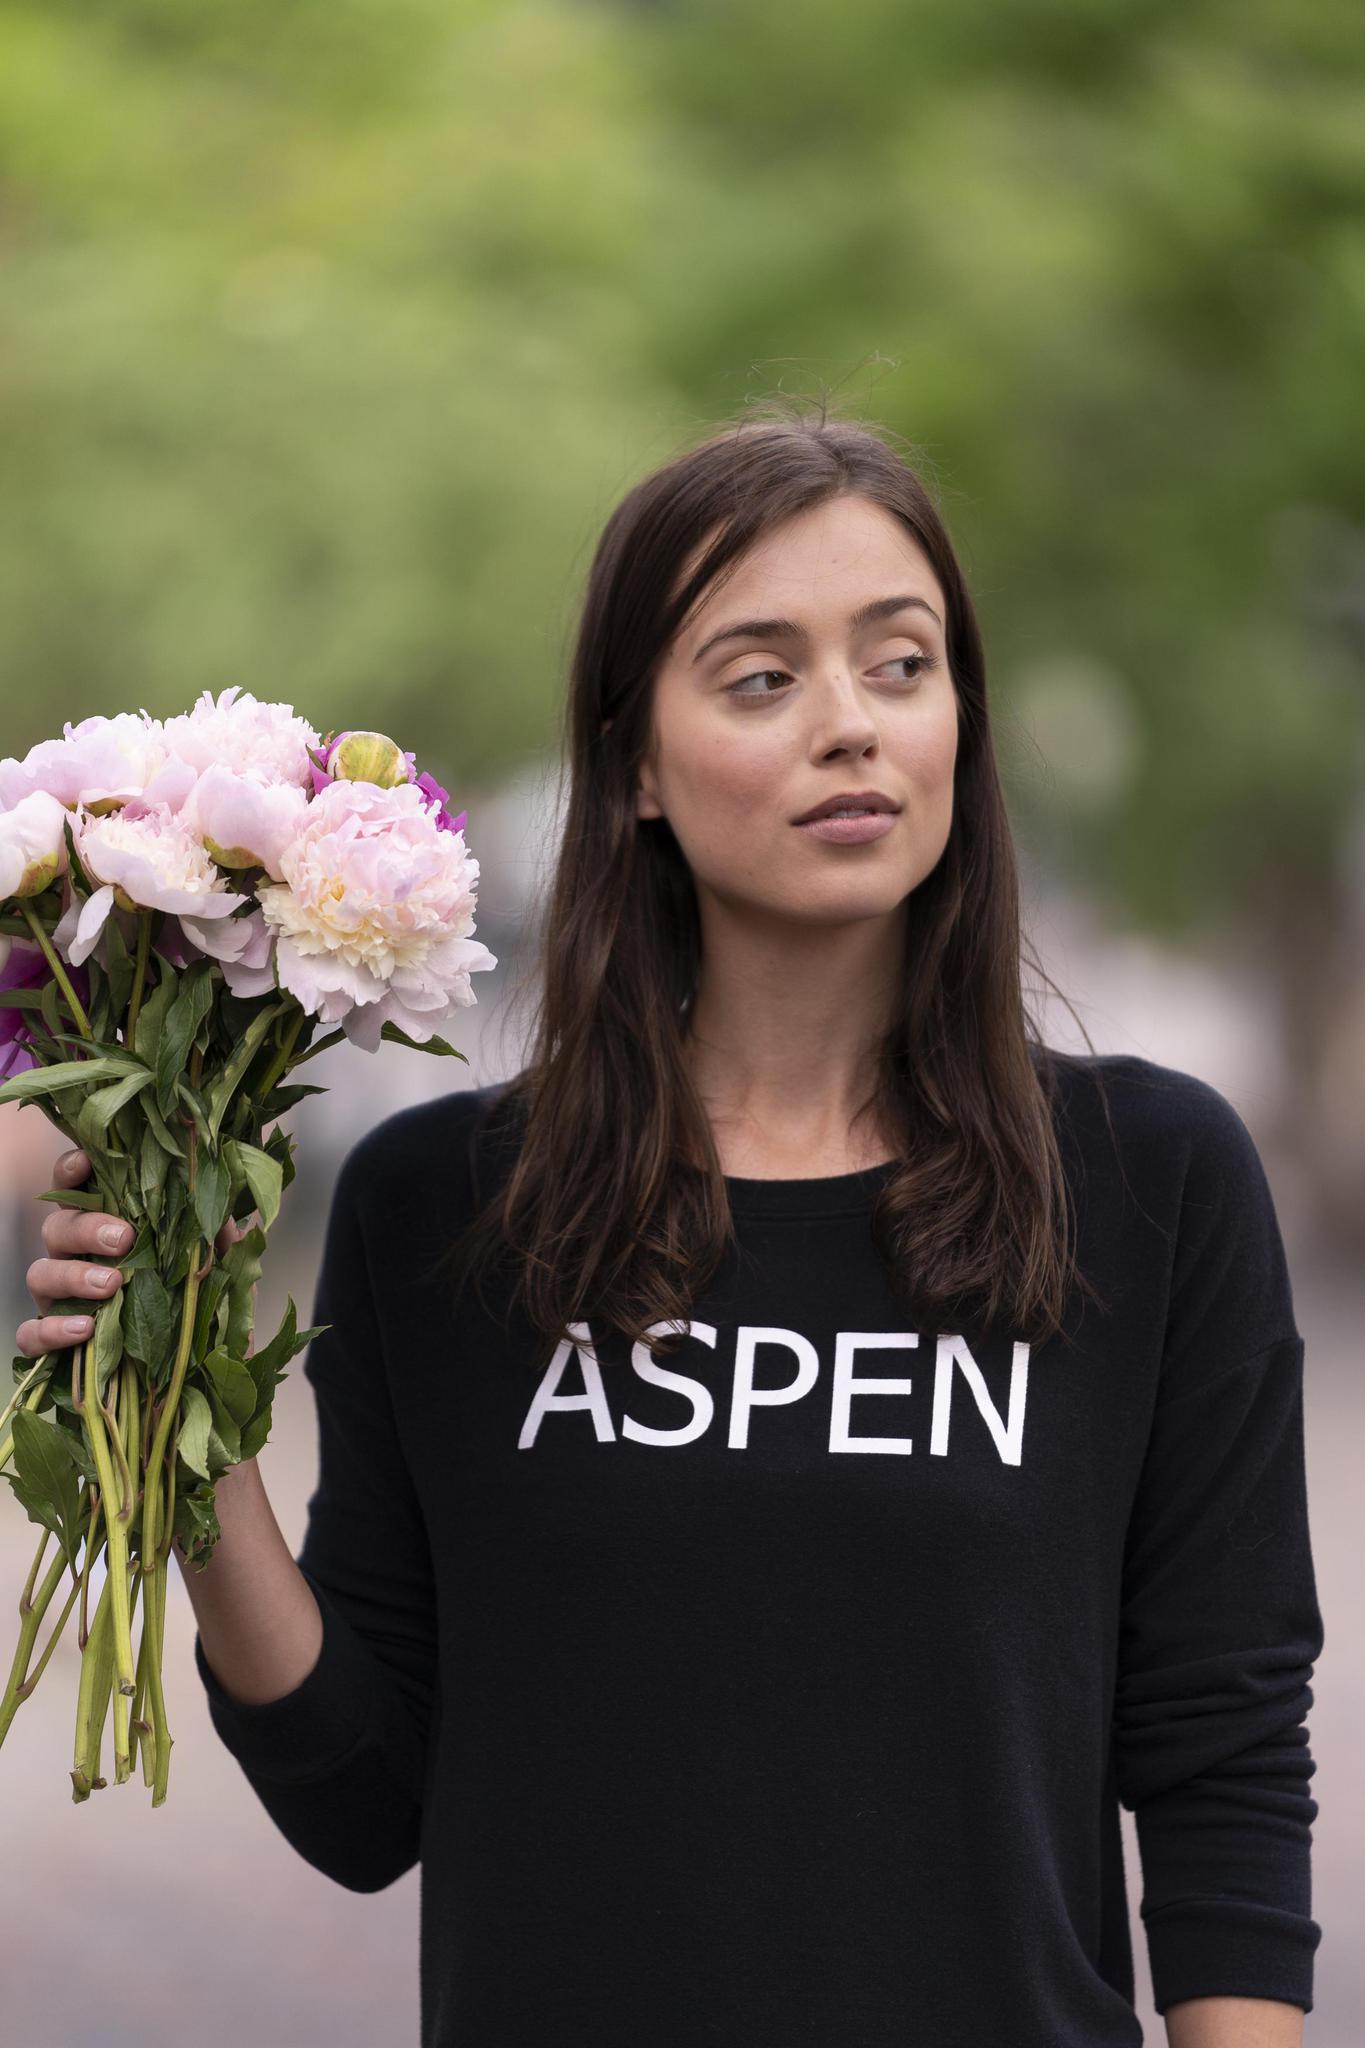 Hello from Aspen long sleeve top in back to black